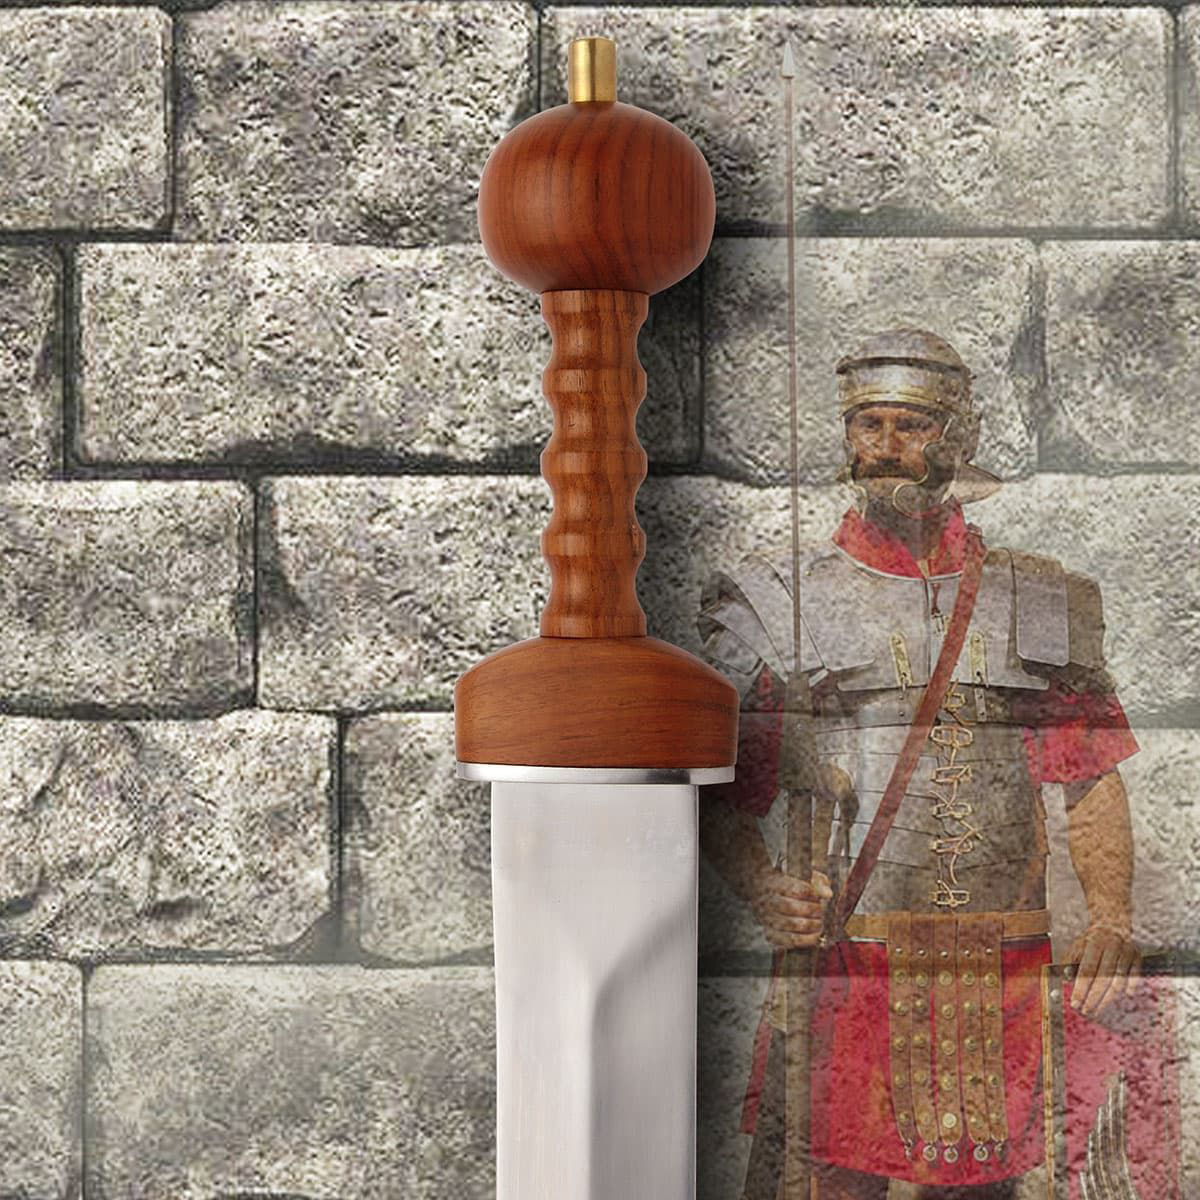 replica Pompeii Gladius is late version of Roman sword with a sharp high carbon steel blade, turned ash and maple handle